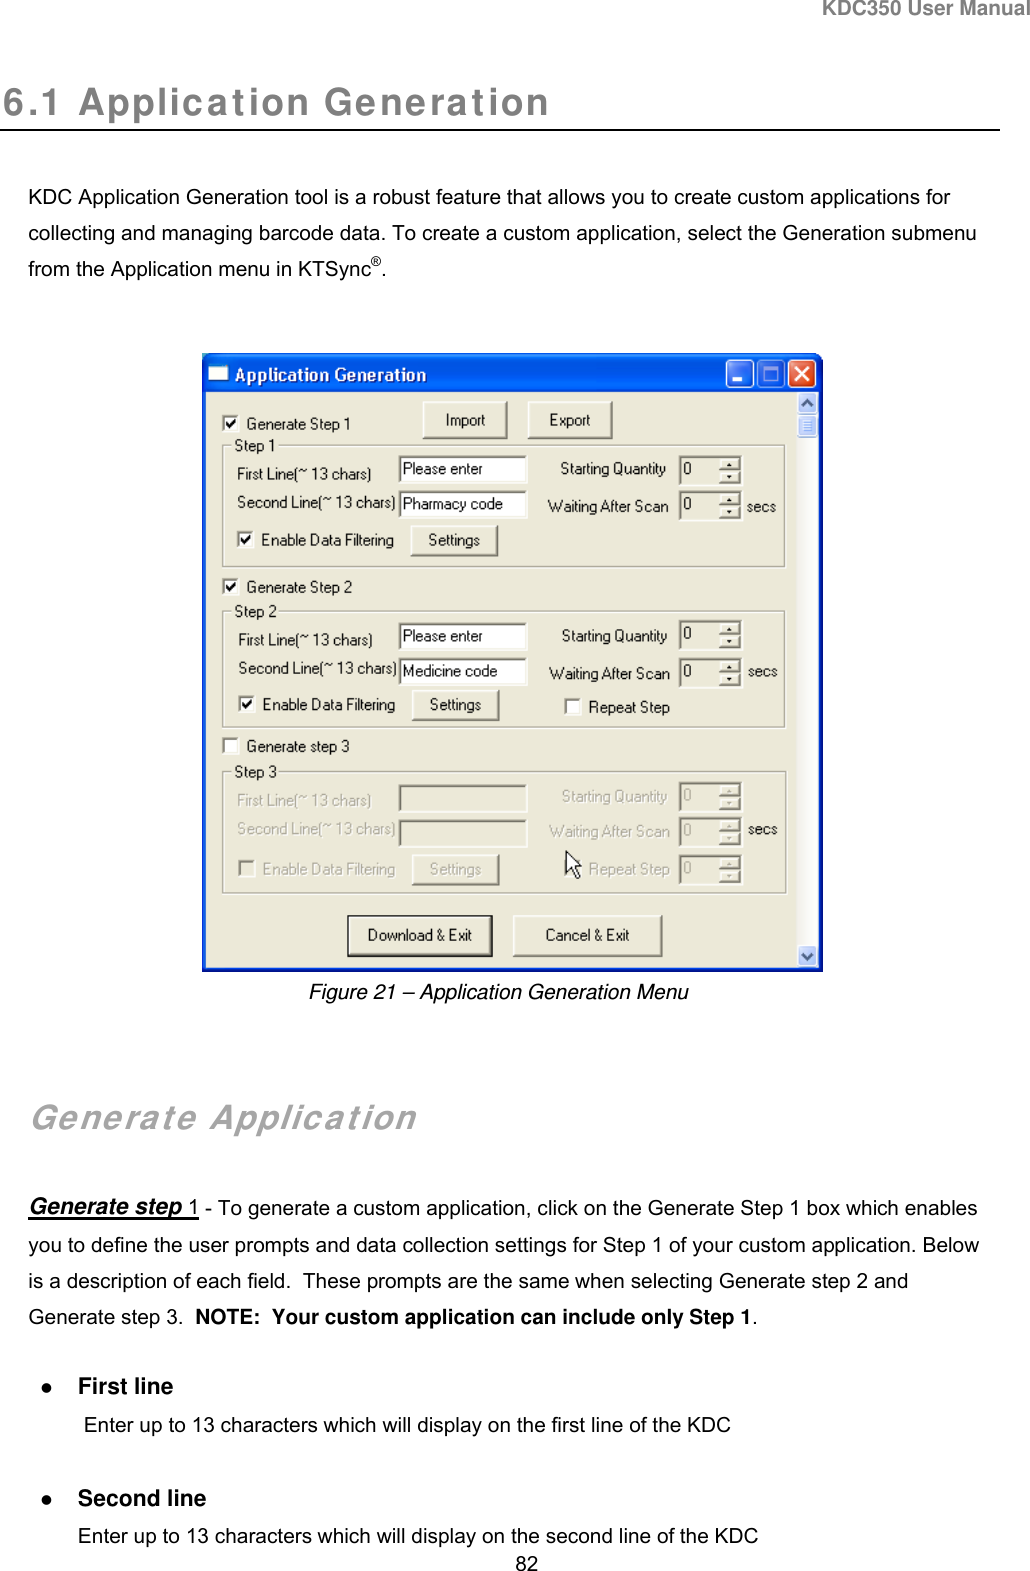 KDC350 User Manual  82  6.1 Application Generation  KDC Application Generation tool is a robust feature that allows you to create custom applications for collecting and managing barcode data. To create a custom application, select the Generation submenu from the Application menu in KTSync®.      Generate Application  Generate step 1 - To generate a custom application, click on the Generate Step 1 box which enables you to define the user prompts and data collection settings for Step 1 of your custom application. Below is a description of each field.  These prompts are the same when selecting Generate step 2 and Generate step 3.  NOTE:  Your custom application can include only Step 1.      First line  Enter up to 13 characters which will display on the first line of the KDC   Second line Enter up to 13 characters which will display on the second line of the KDC Figure 21 – Application Generation Menu 